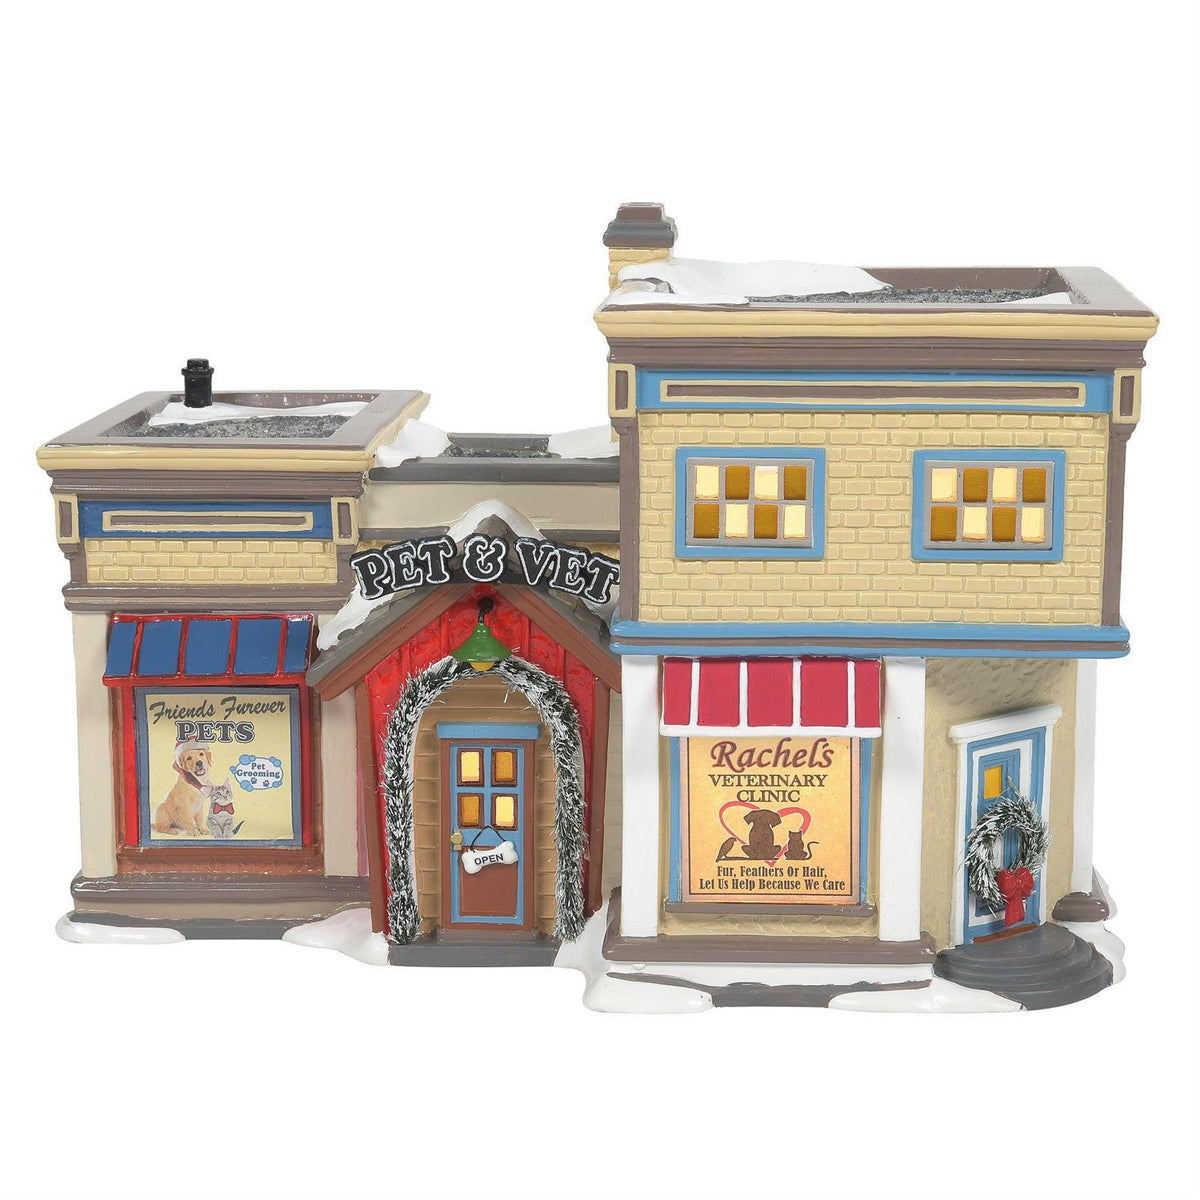 Department 56 Snow Village The Grinch House 6011416